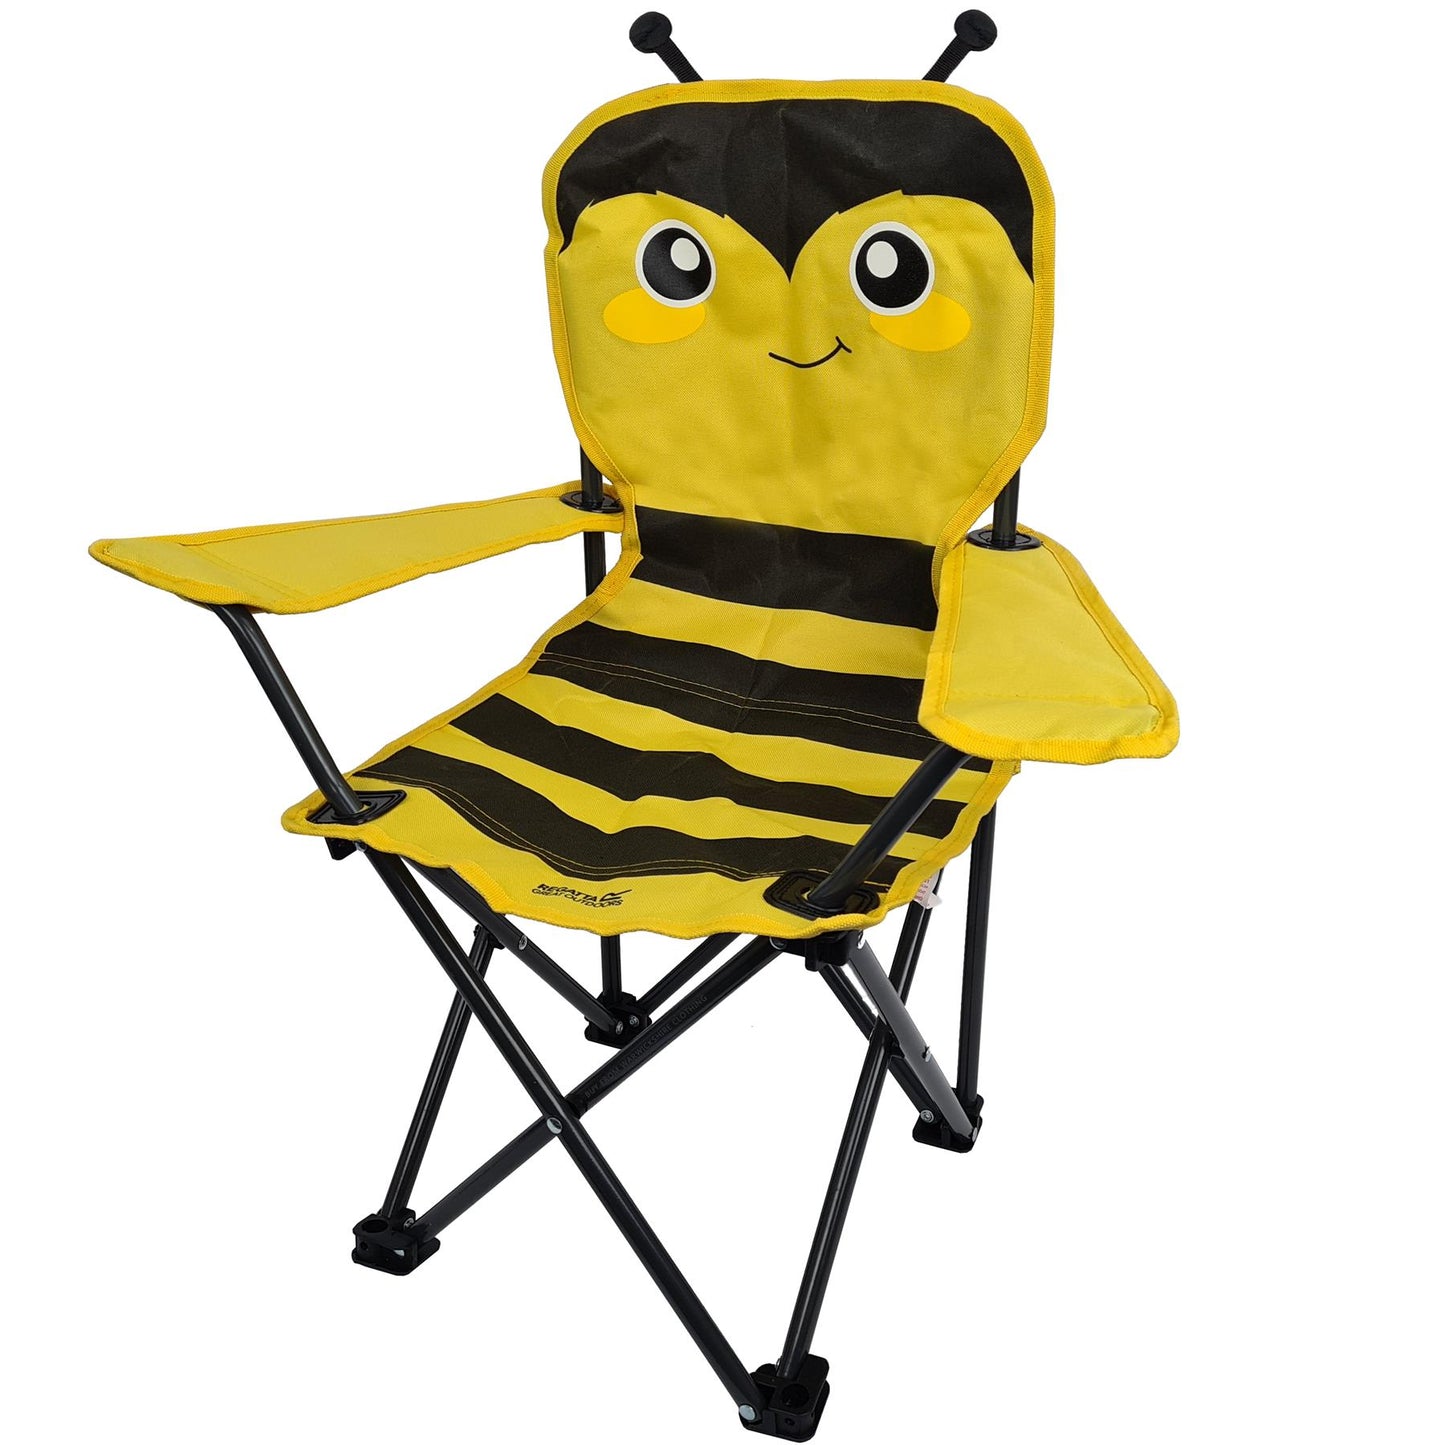 Regatta Animal Kids Chair - Available in store only